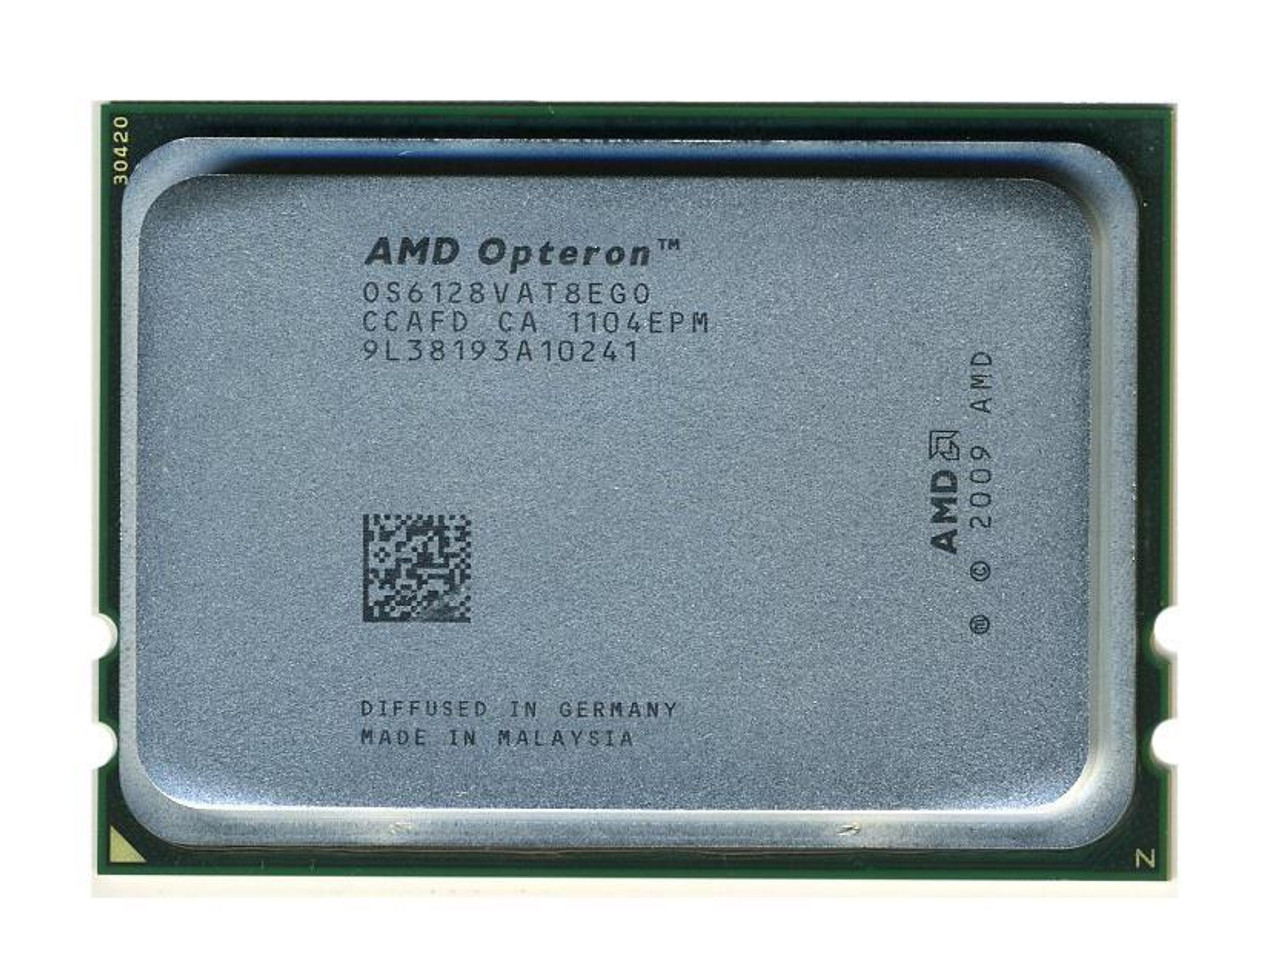 HPE 2.00GHz 12MB L3 Cache Socket G34 AMD Opteron 6128 8 Core Processor Upgrade